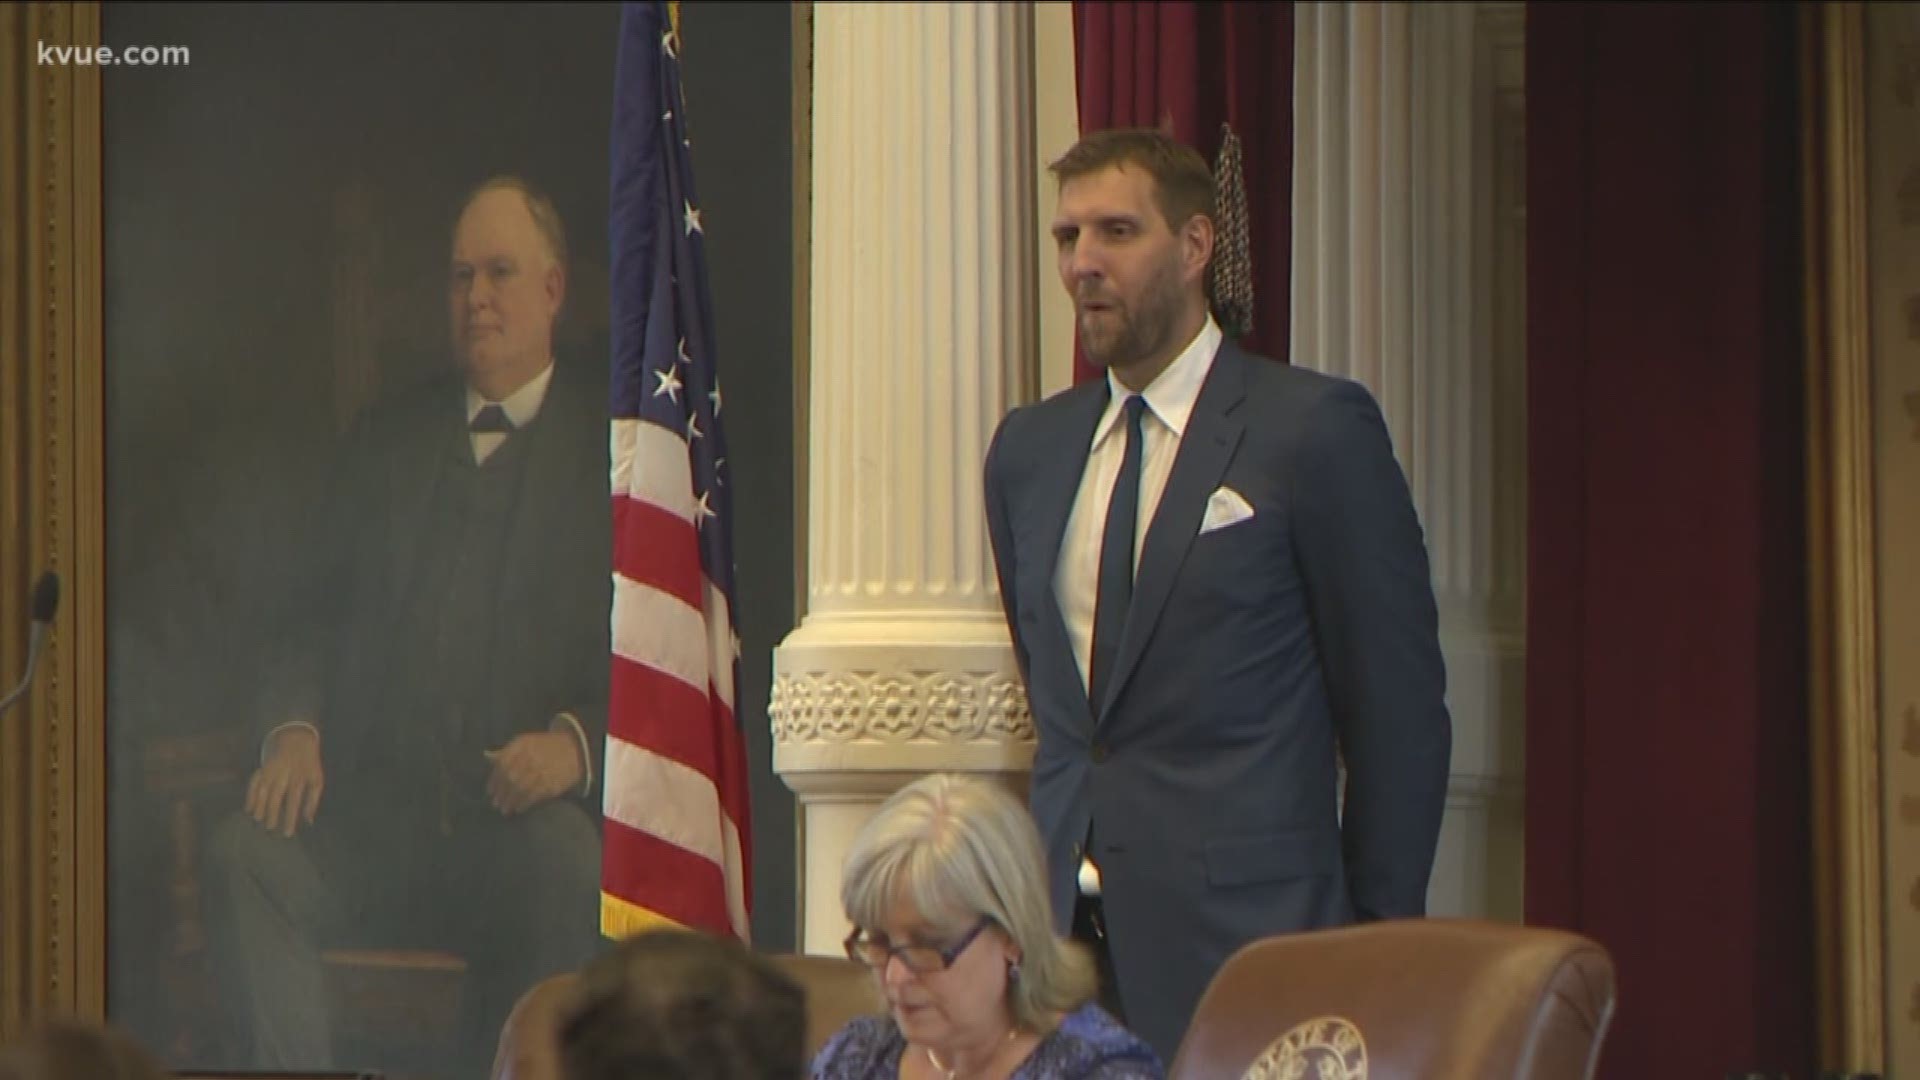 Retired Dallas Mavericks player Dirk Nowitzki was honored in both the Texas House and Senate for his outstanding career.